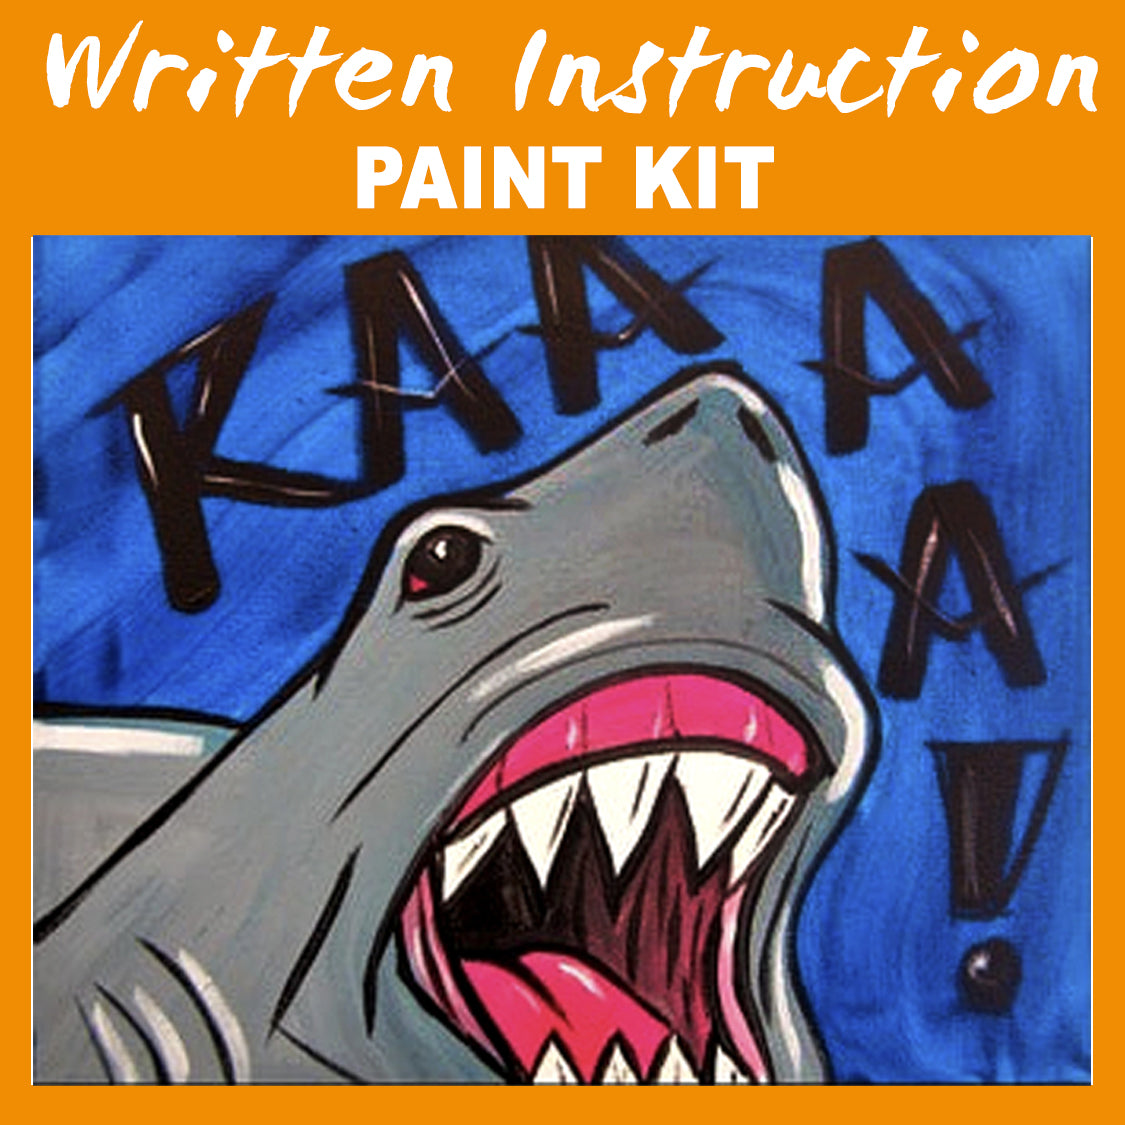 "Shark Attack" Paint at Home Kit With Written Instructions